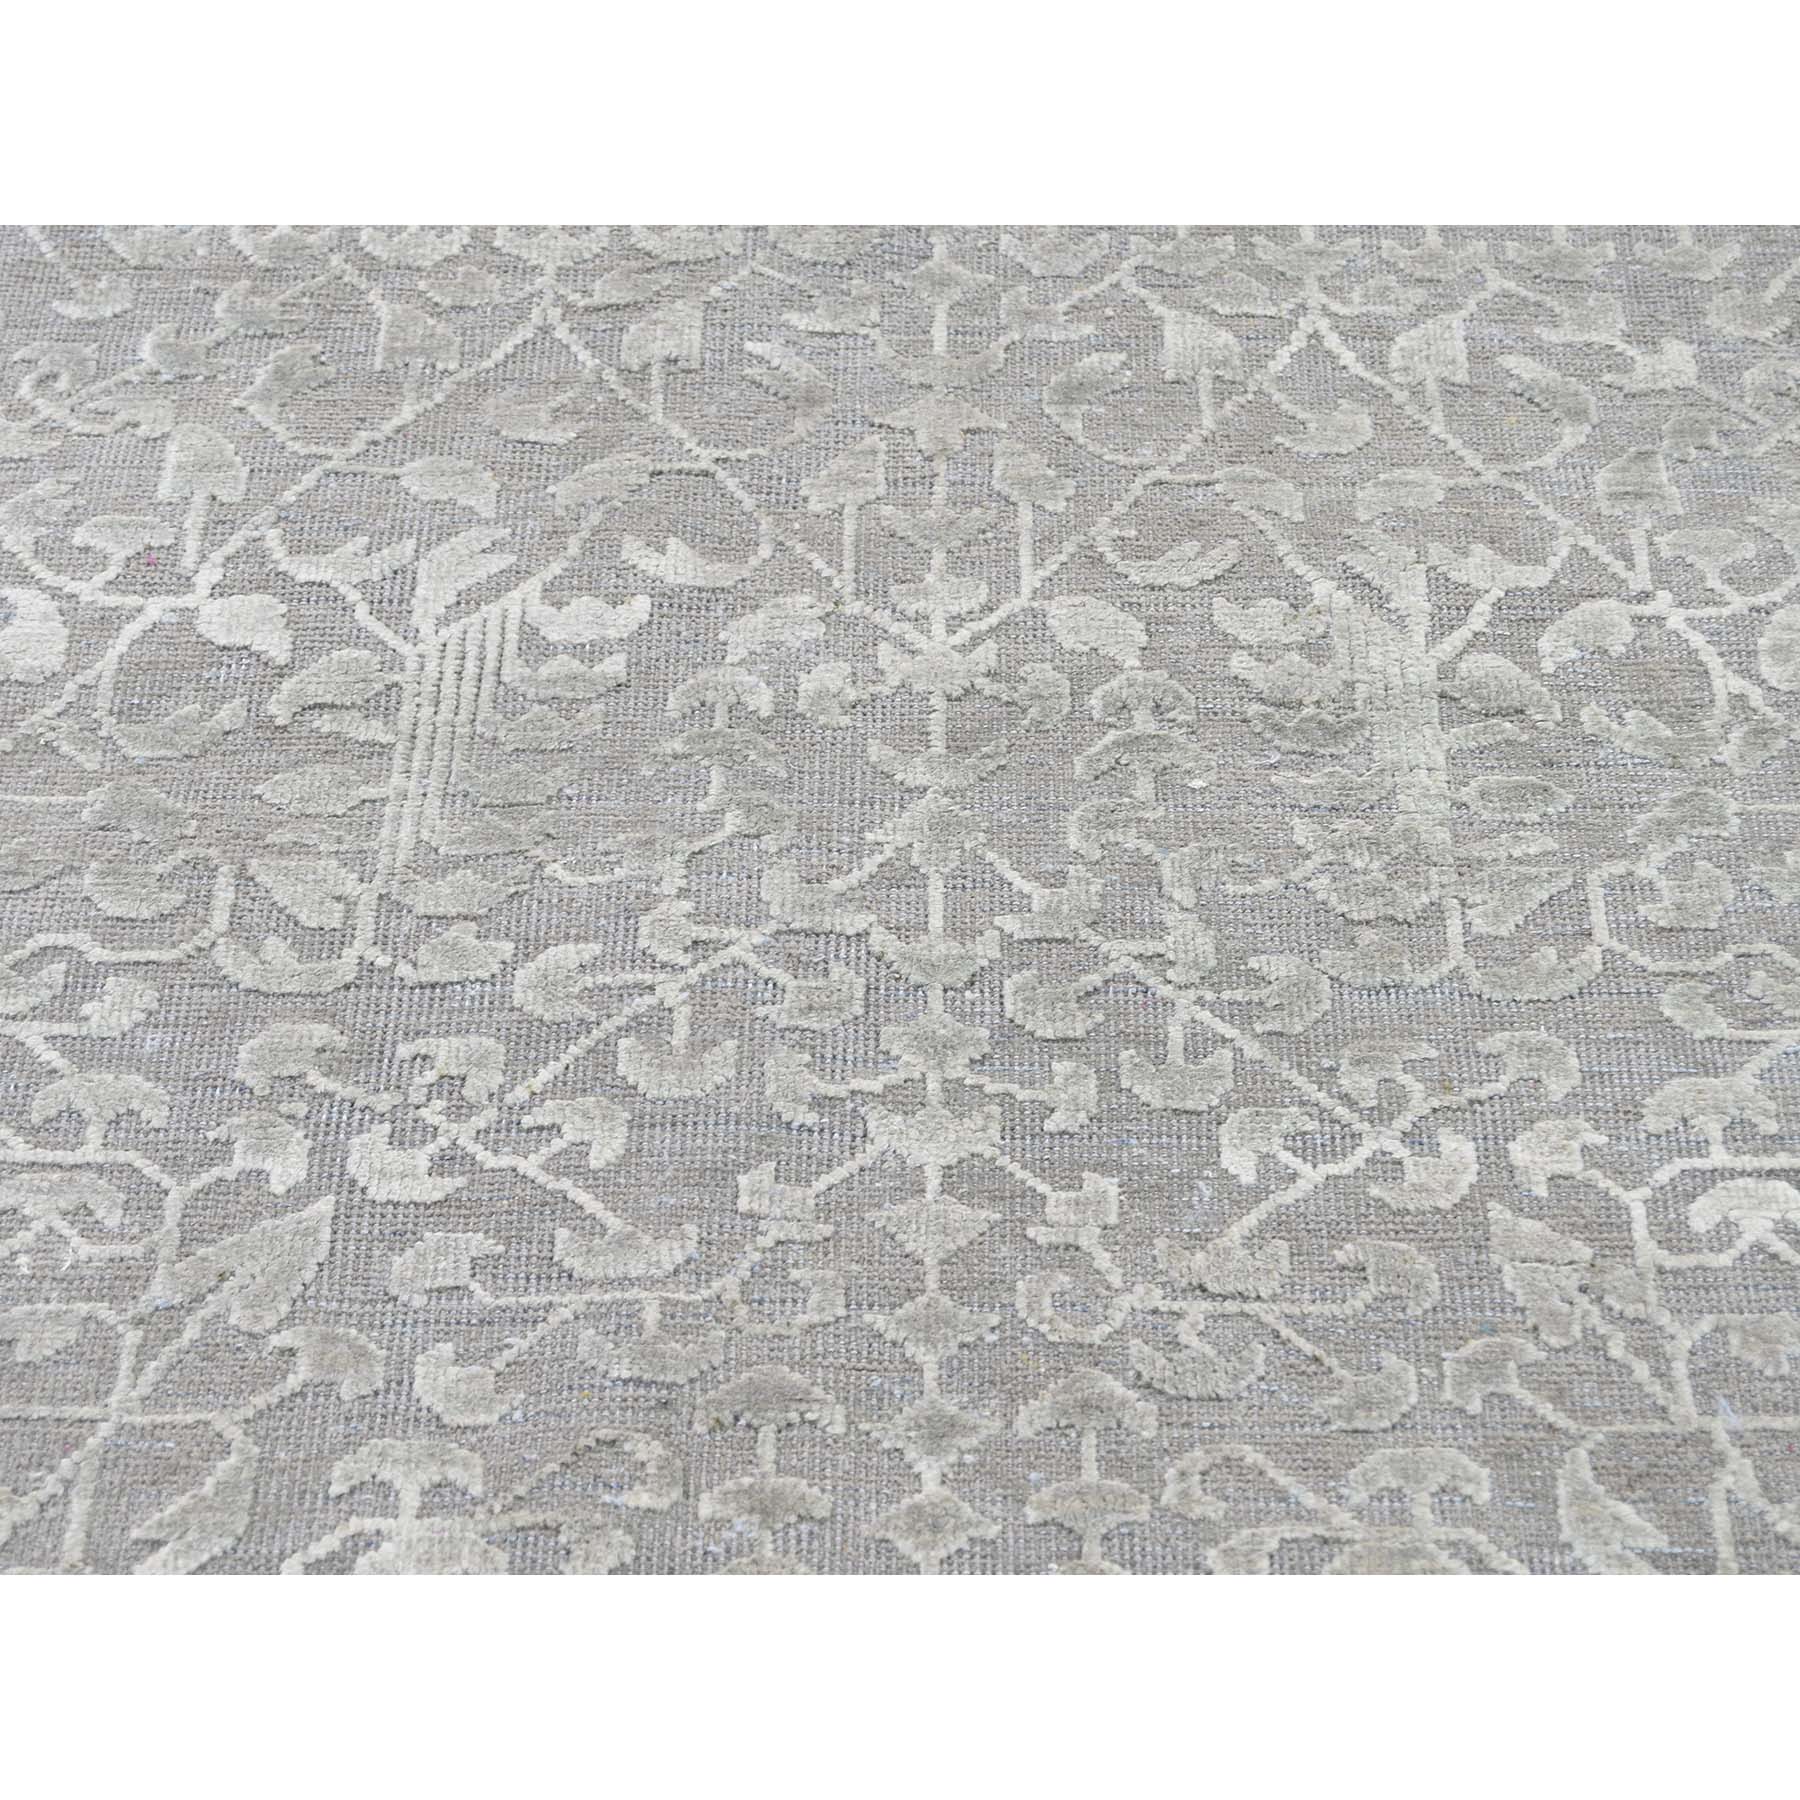 9-x12-1  Tone on Tone Silk with Oxidized Wool Hand-Knotted Oriental Rug 